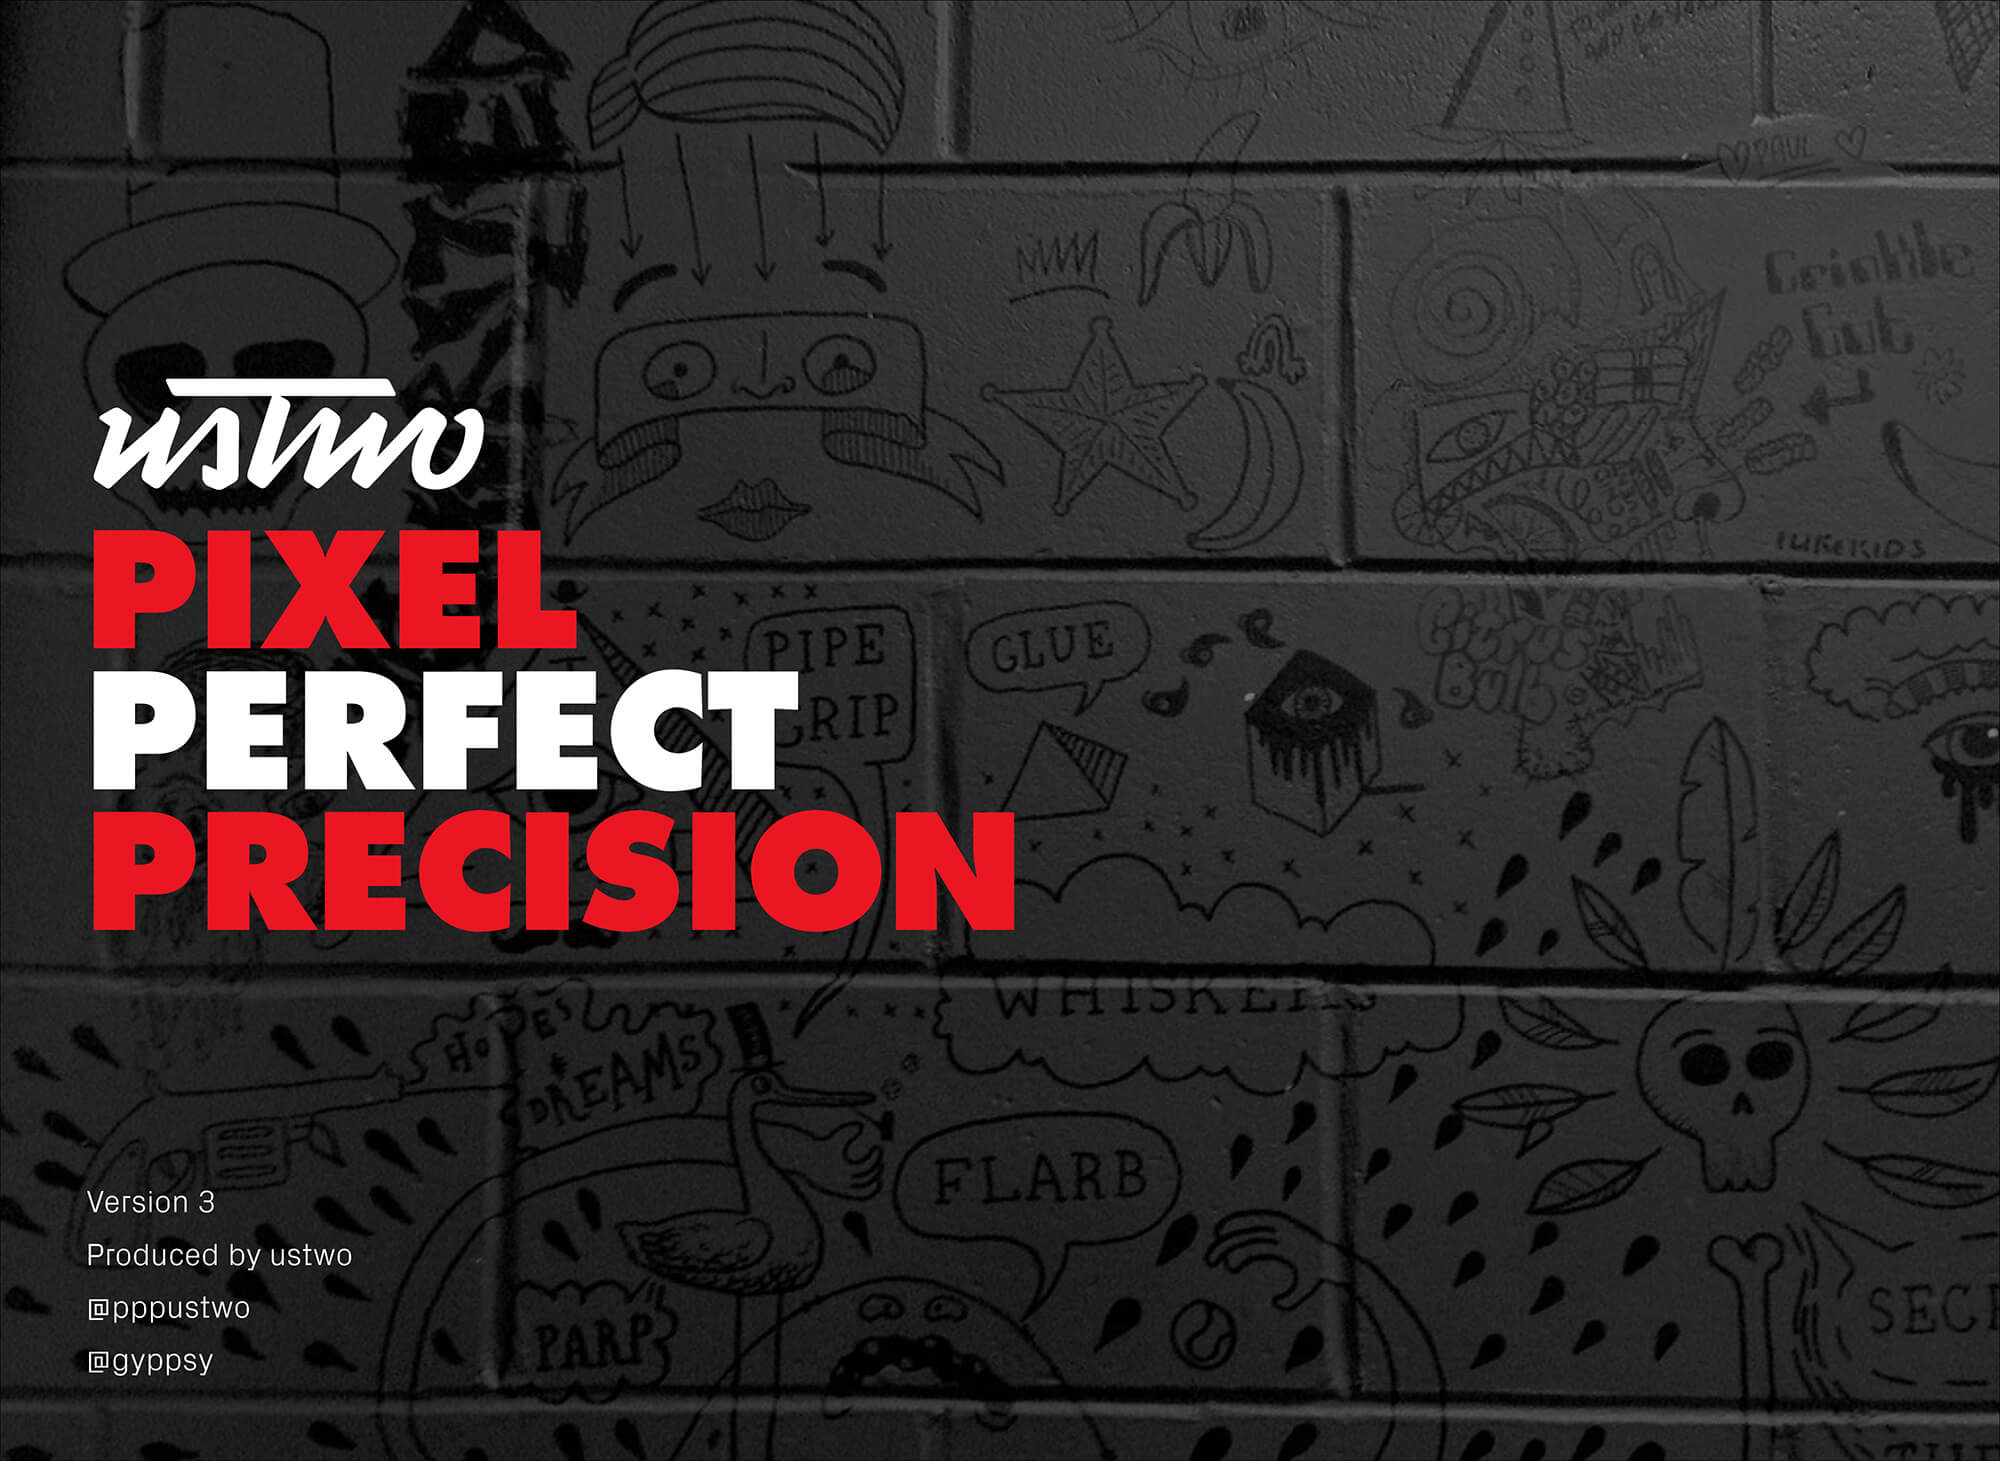 PPP-Pixel-Perfect-Precision-USTWO